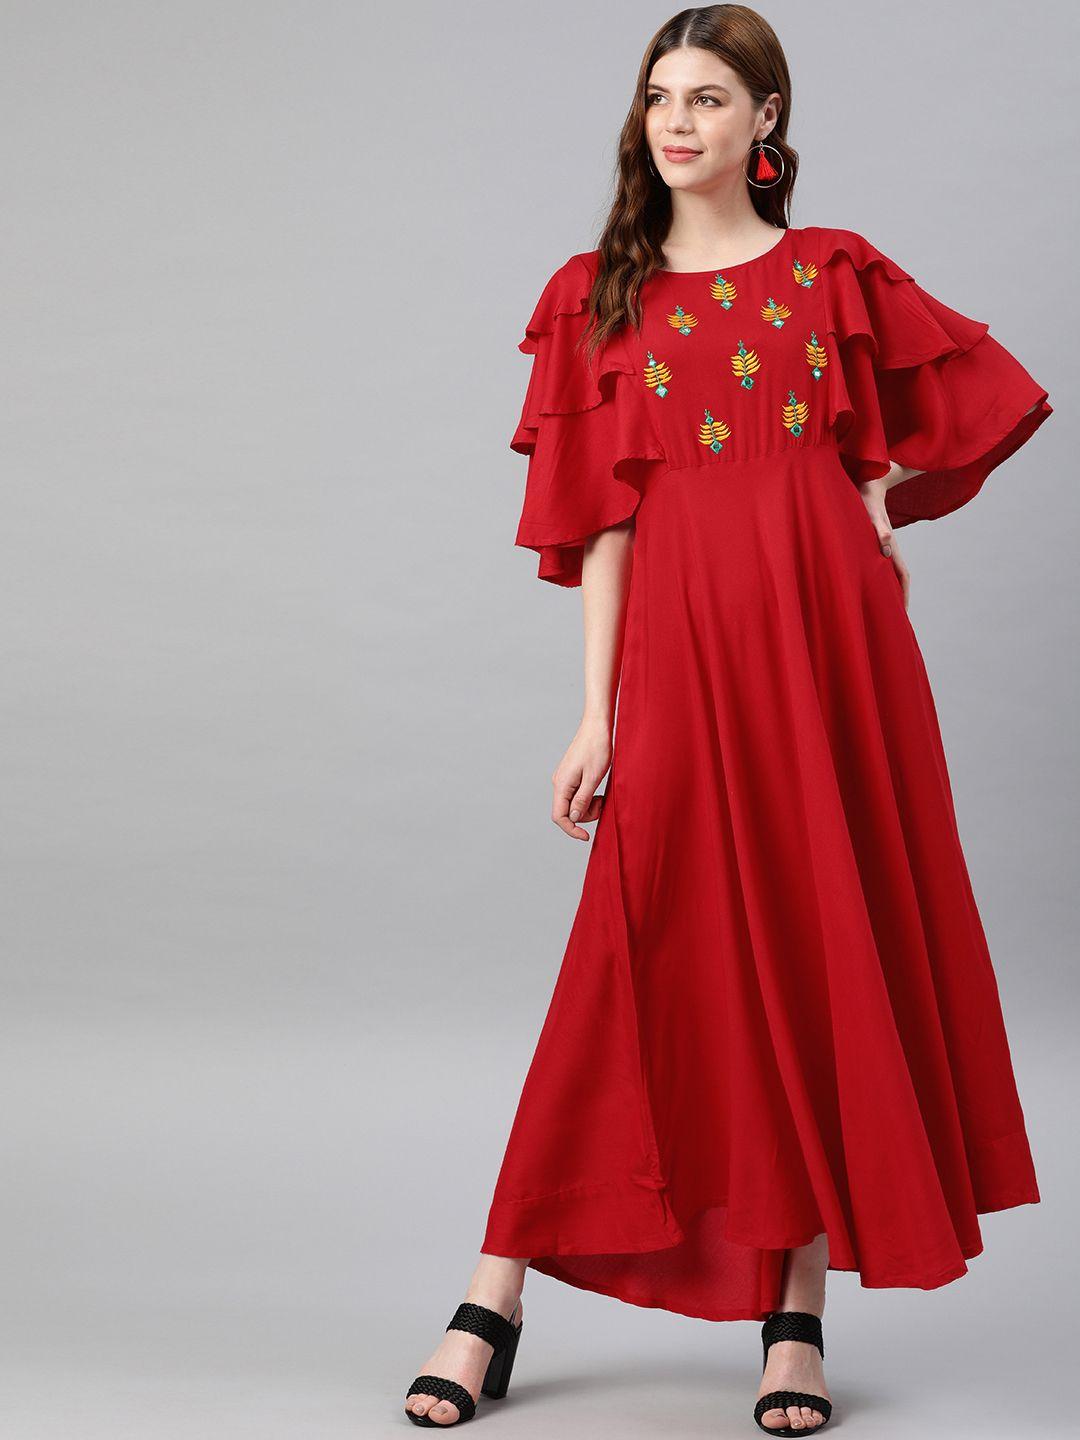 yash-gallery-women-red-solid-maxi-dress